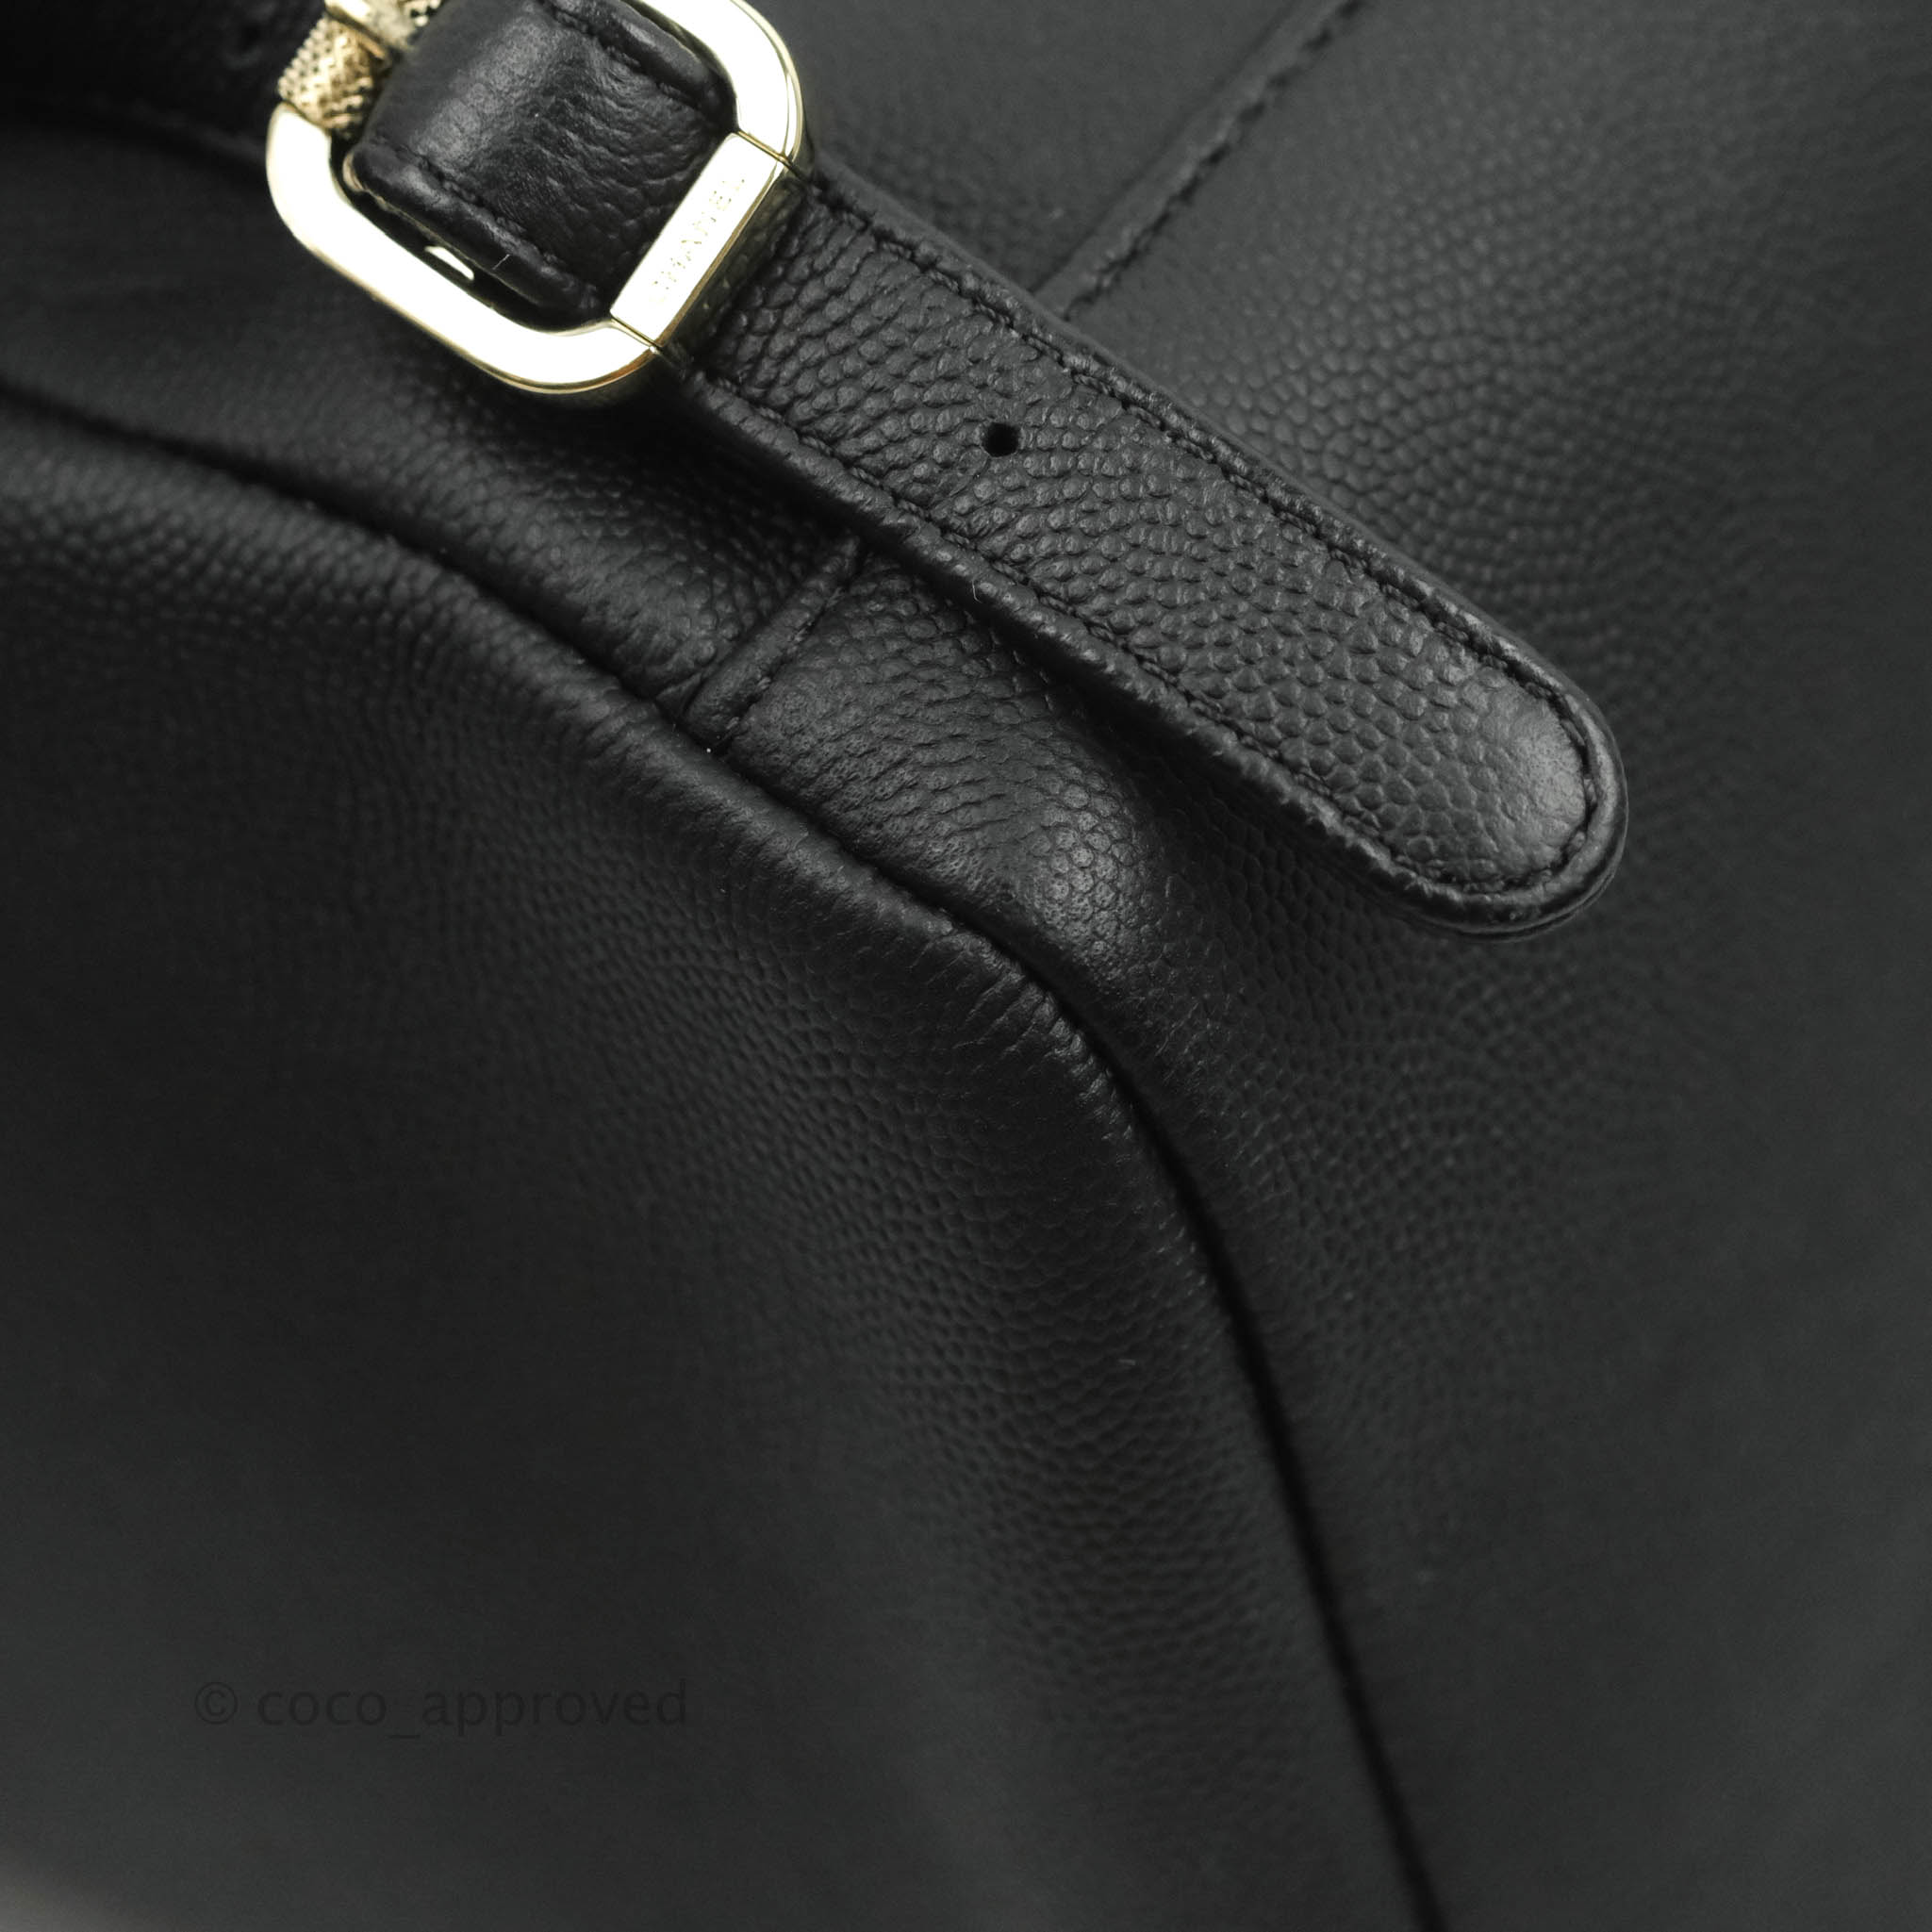 Chanel Business Affinity Backpack, Black Caviar with Gold Hardware